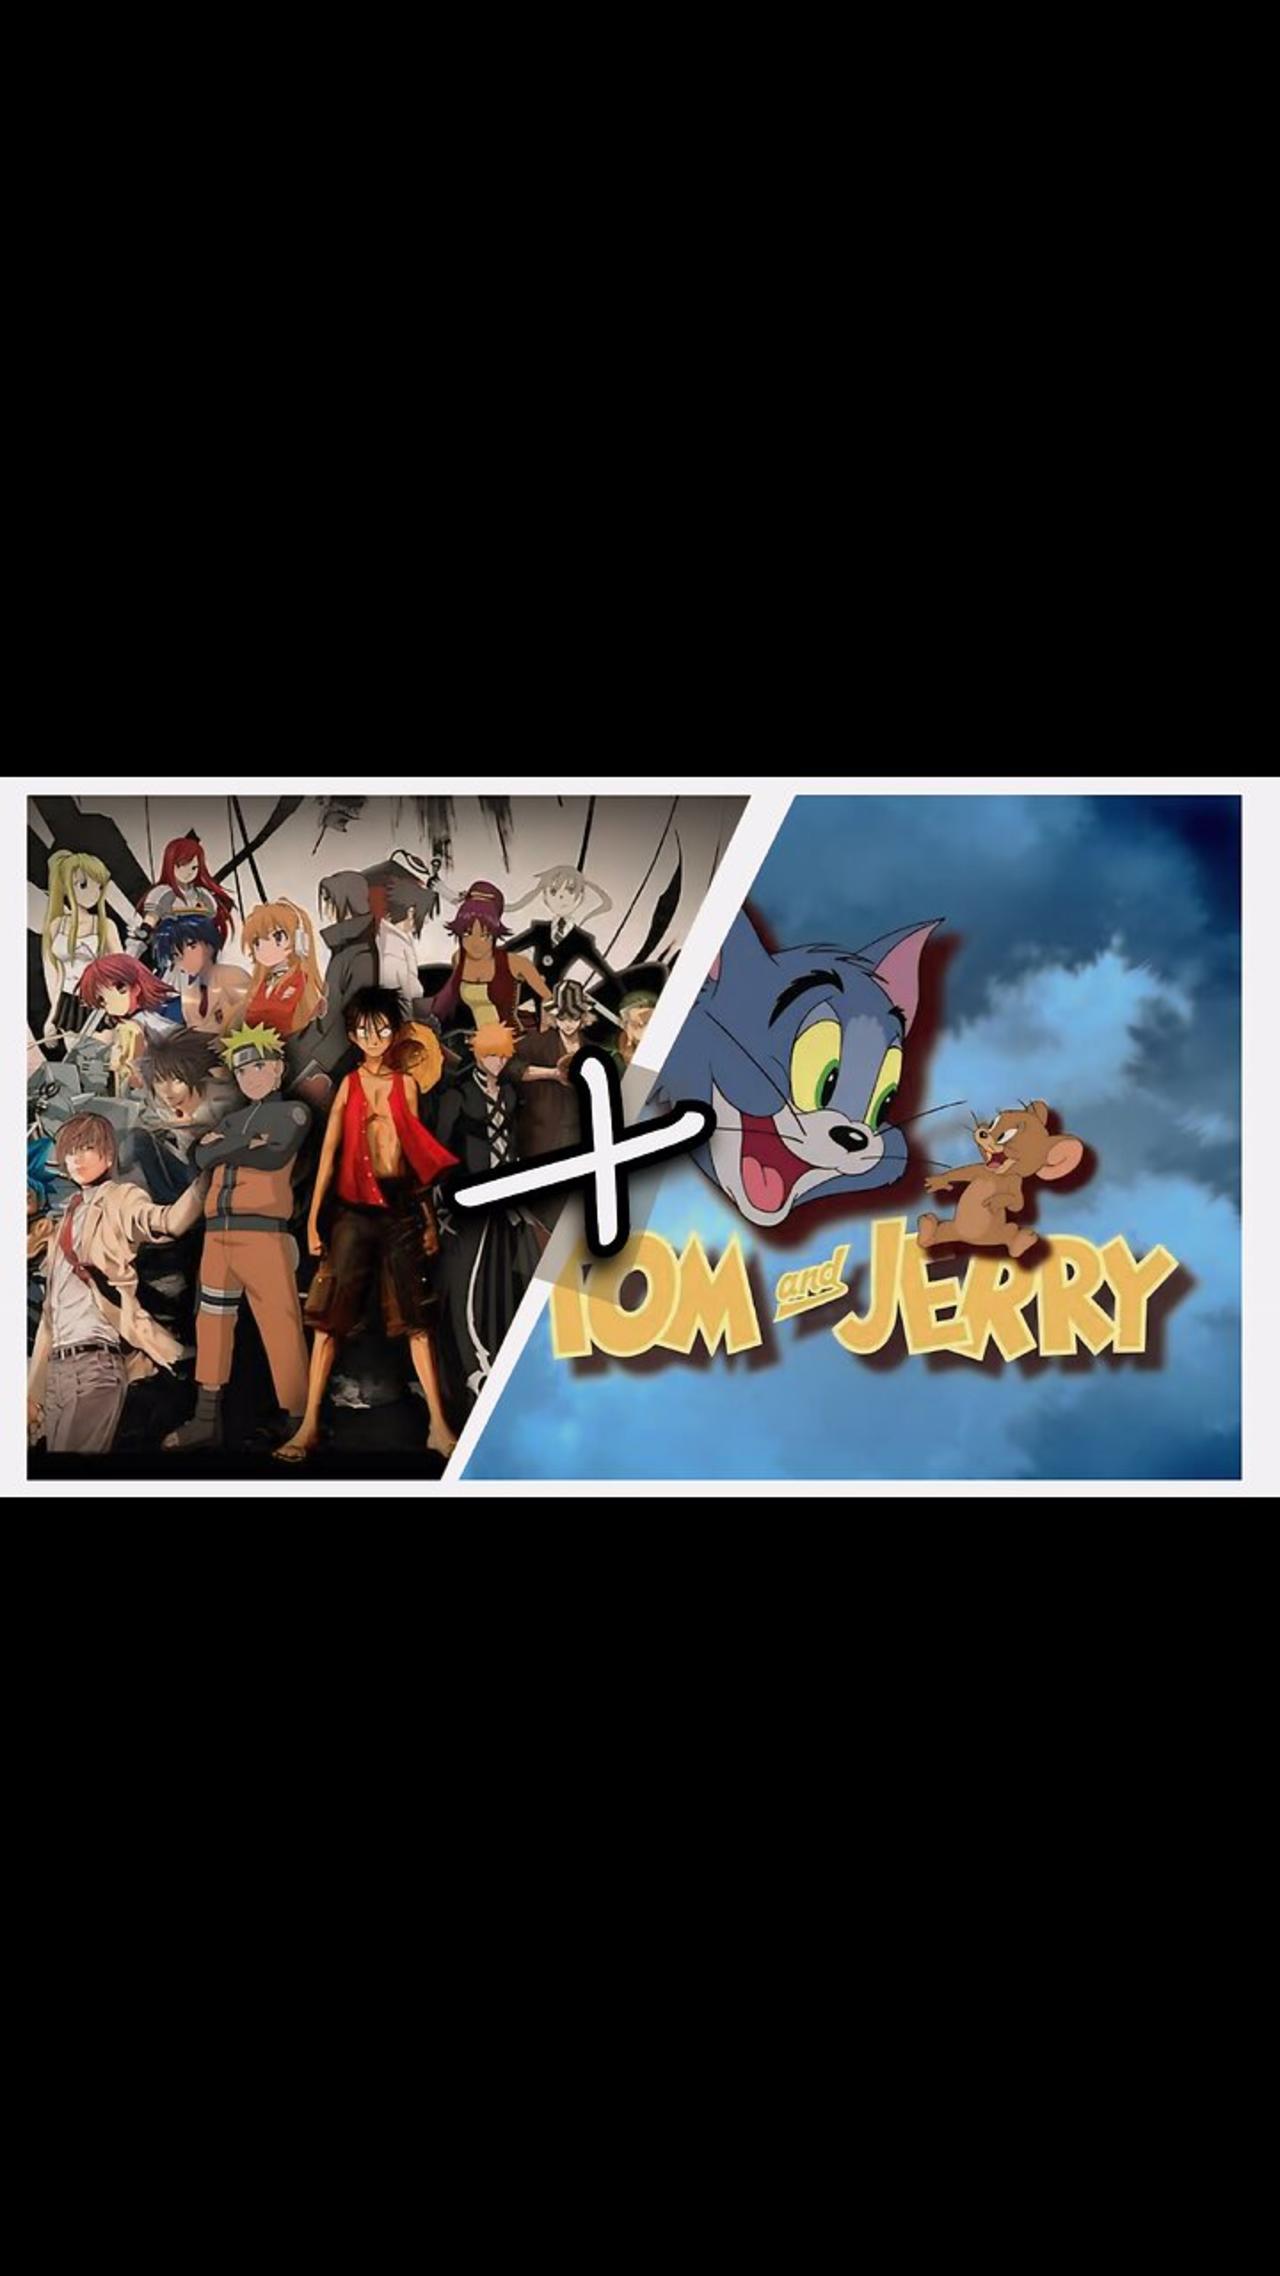 Tom and Jerry and Anime Crossover 😍😎 #anime #tomandjerry #viral #fyp #fyppagege #